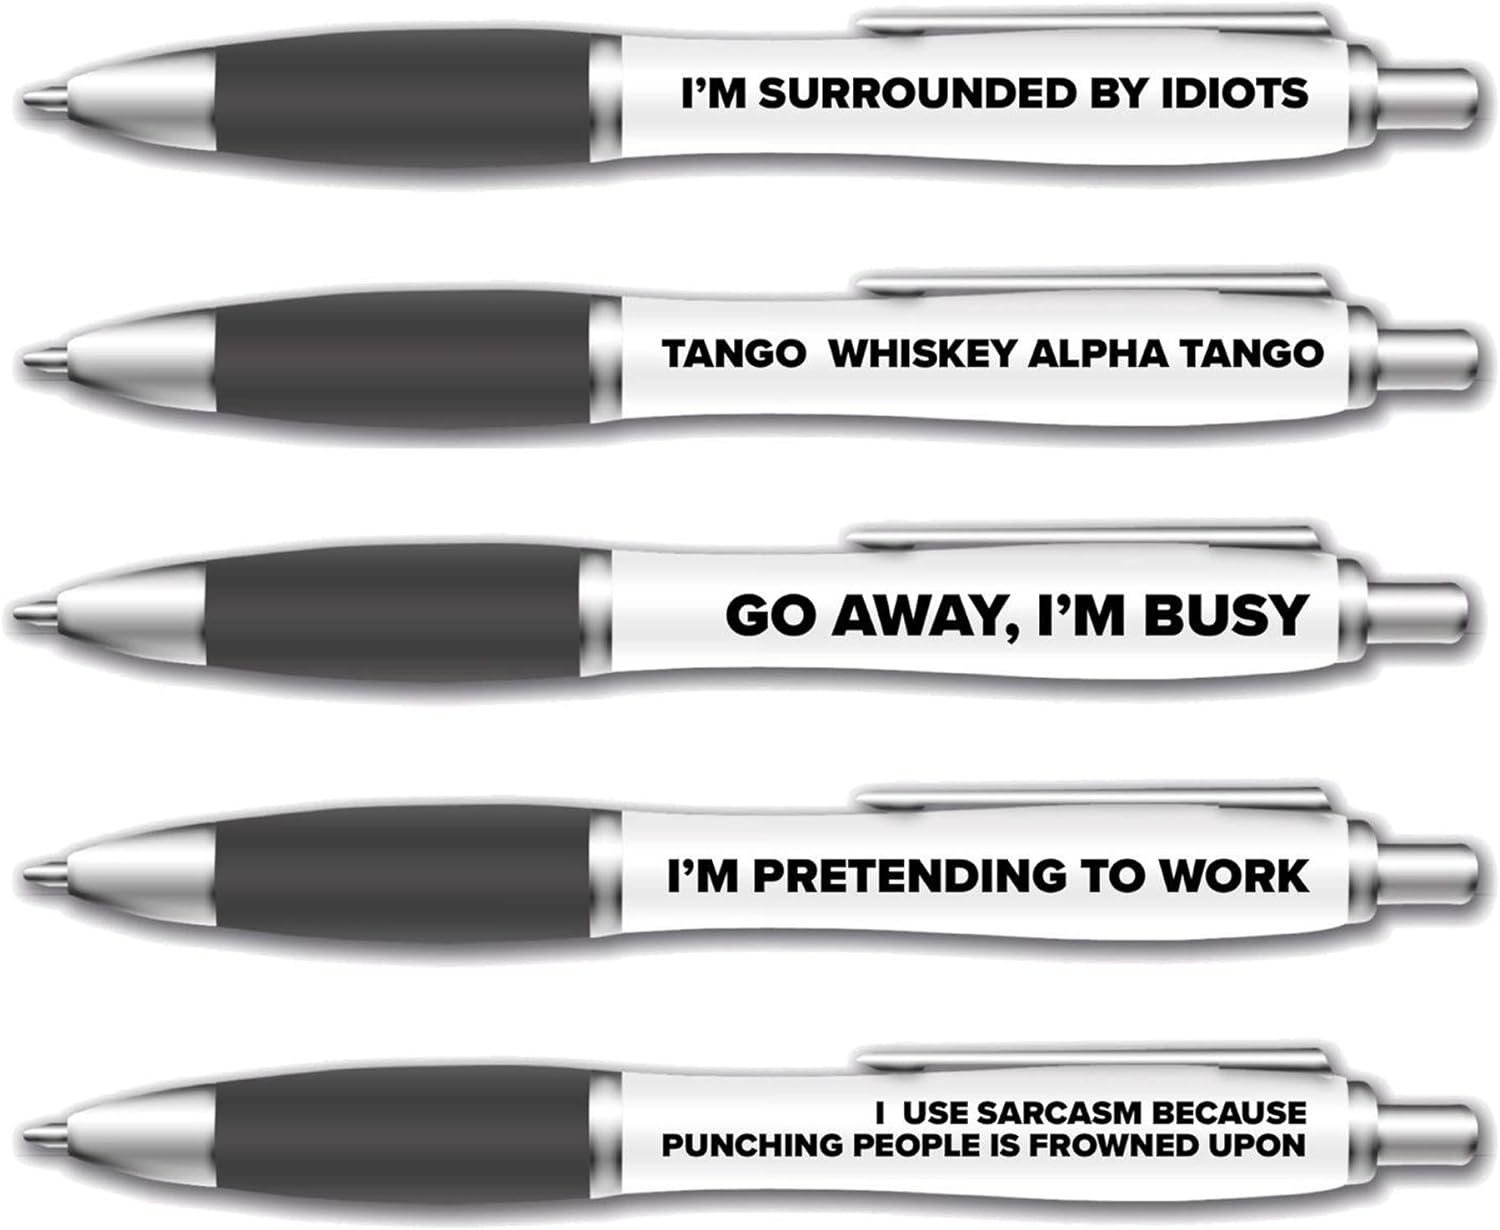 5 Pack of Ballpoint Pens - Funny Pen Set For Colleagues - Funky Stationery Quirky Gift - Office Desk Accessories - Rude Pen Set - Funny Friend Gift